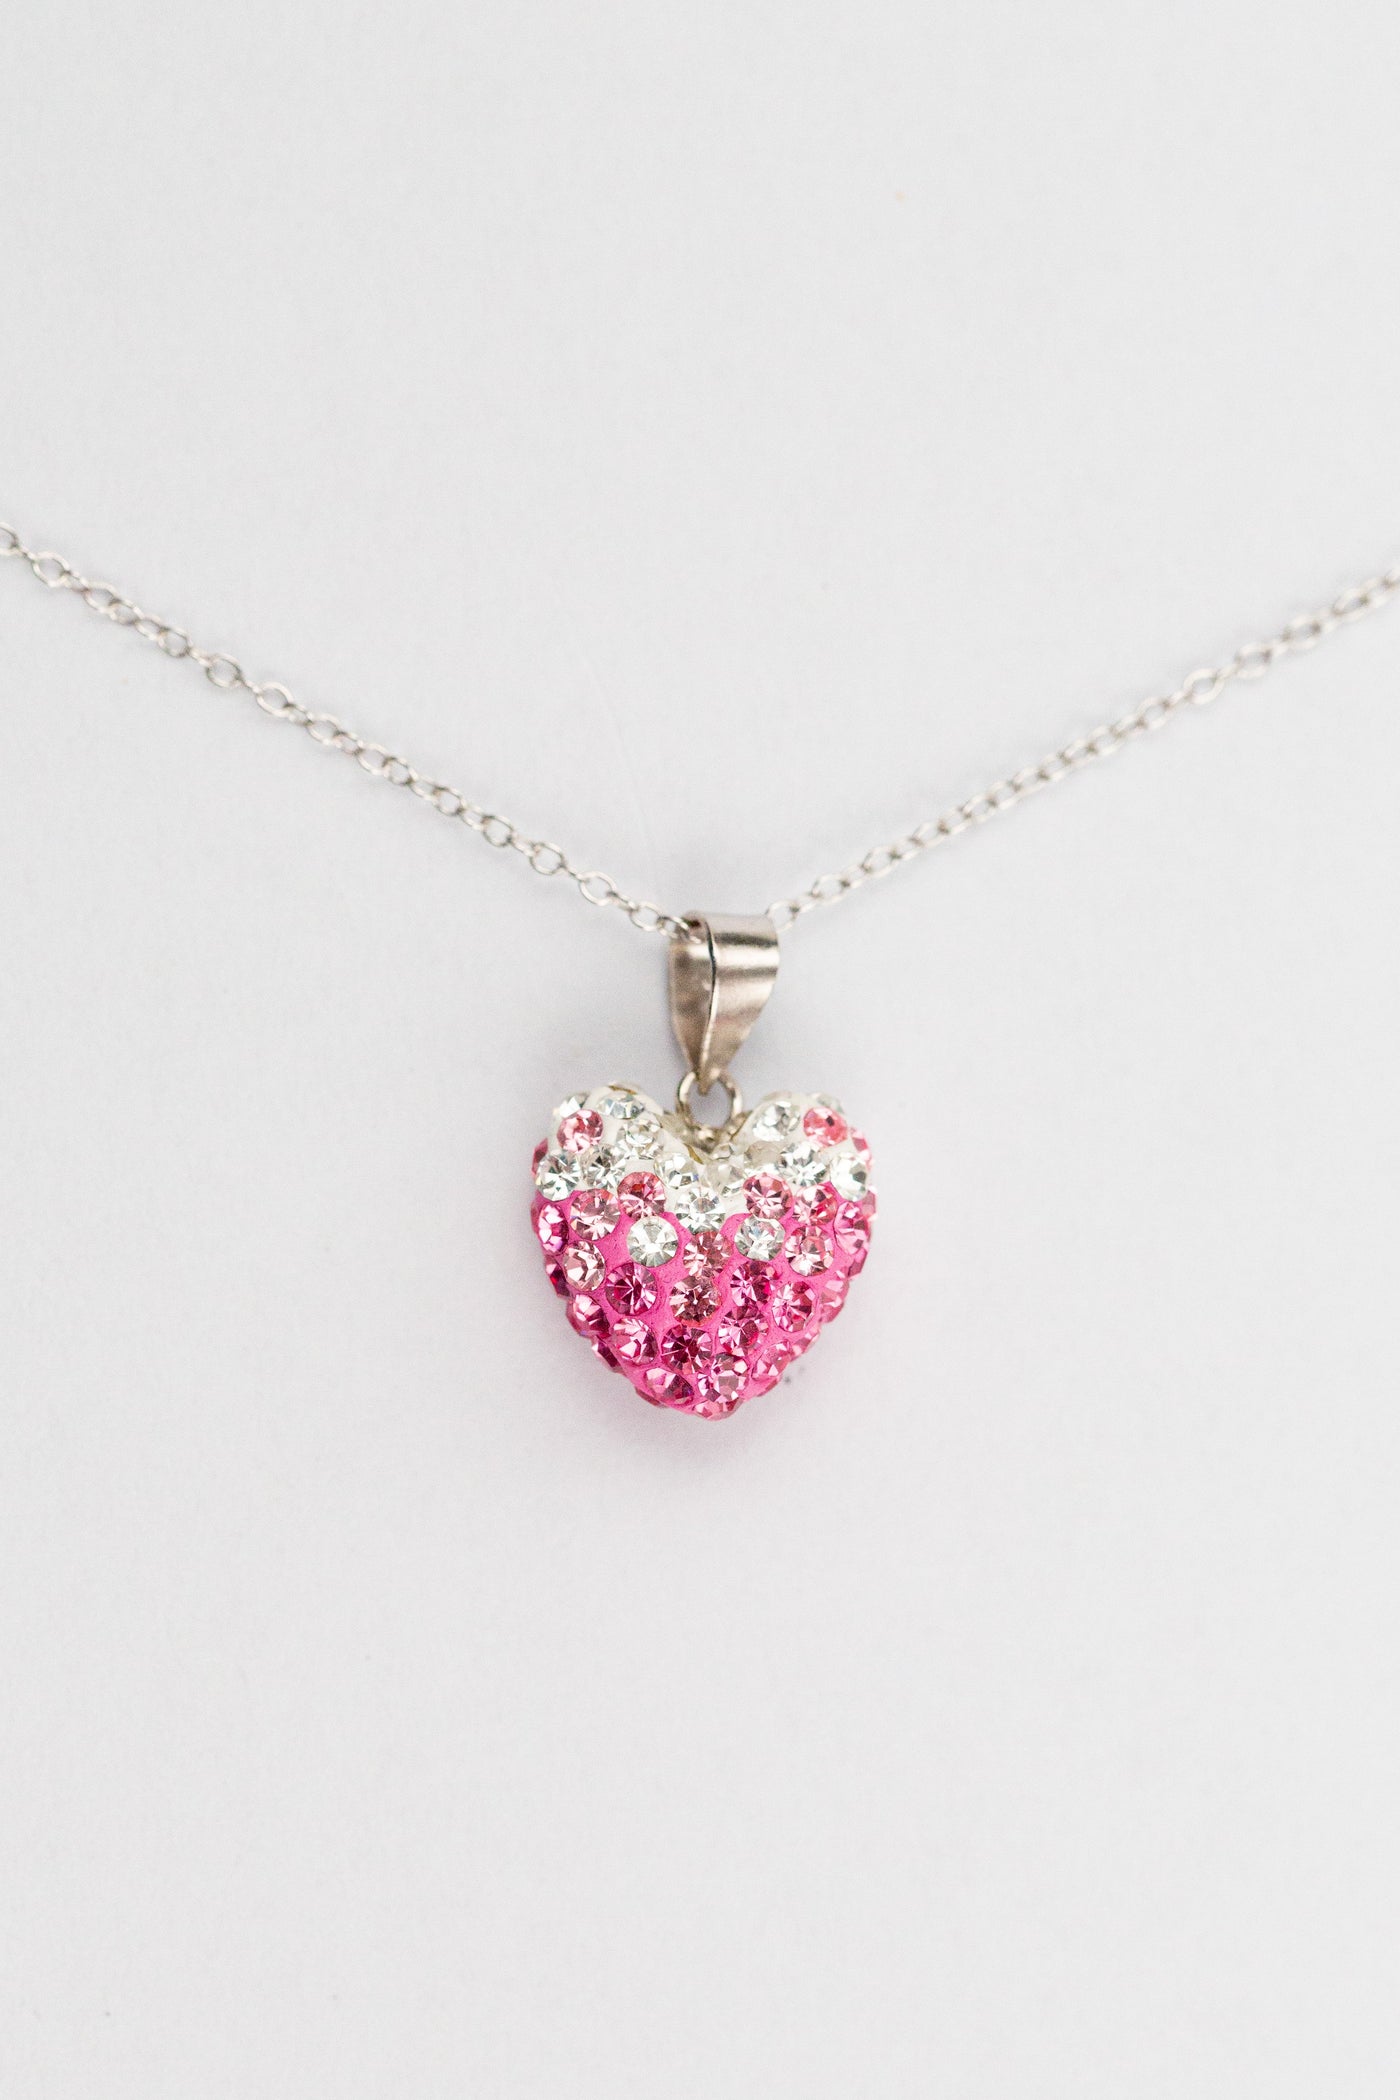 Buy Swarovski Crystal Light Rose Pink Heart Pendant Necklace Sterling  Silver, Pink Crystal Heart Necklace, Gift for Wife, Mum/ Valentine Gift  Online in India - Etsy